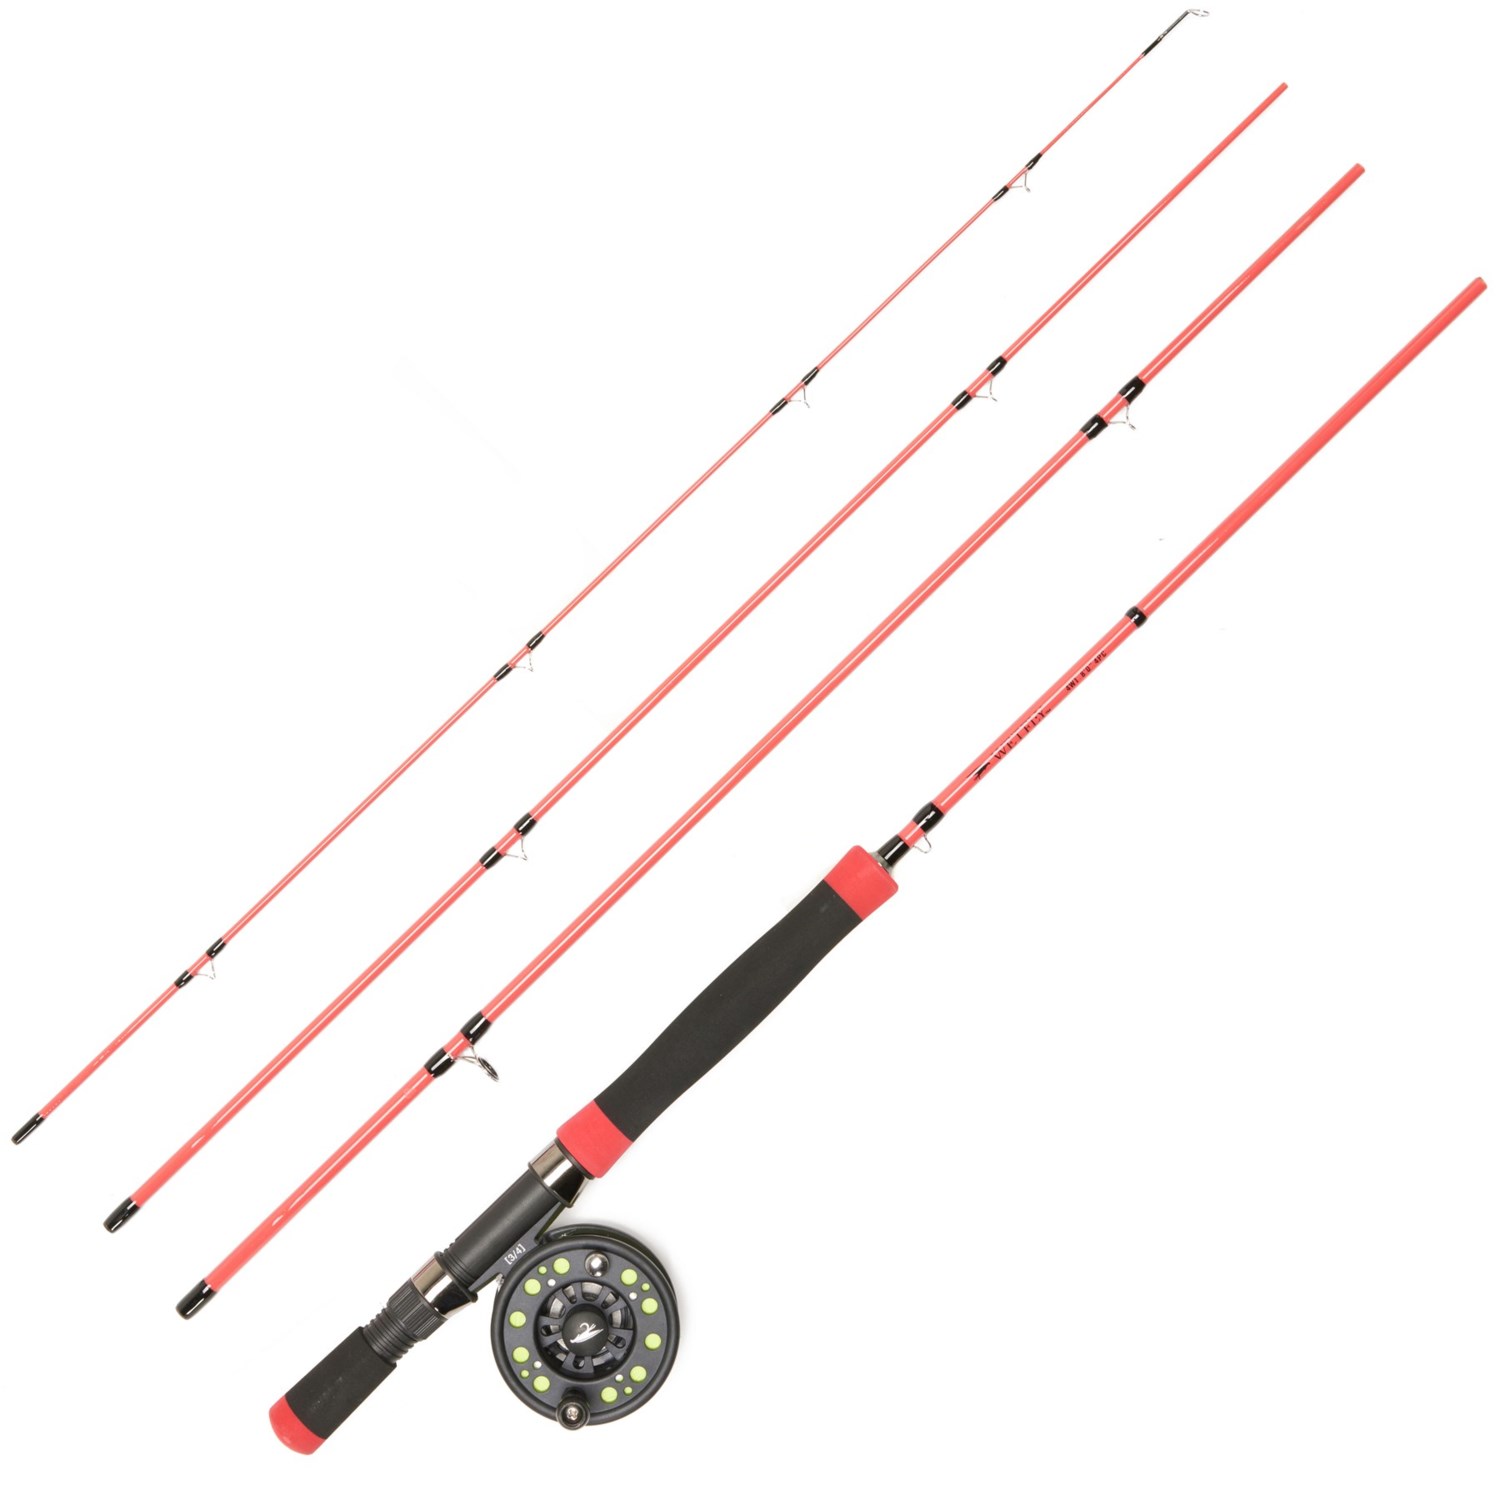 Wetfly Nano Strike Fly Rod and Reel Combo Starter Kit (For Boys and Girls)  - Save 33%